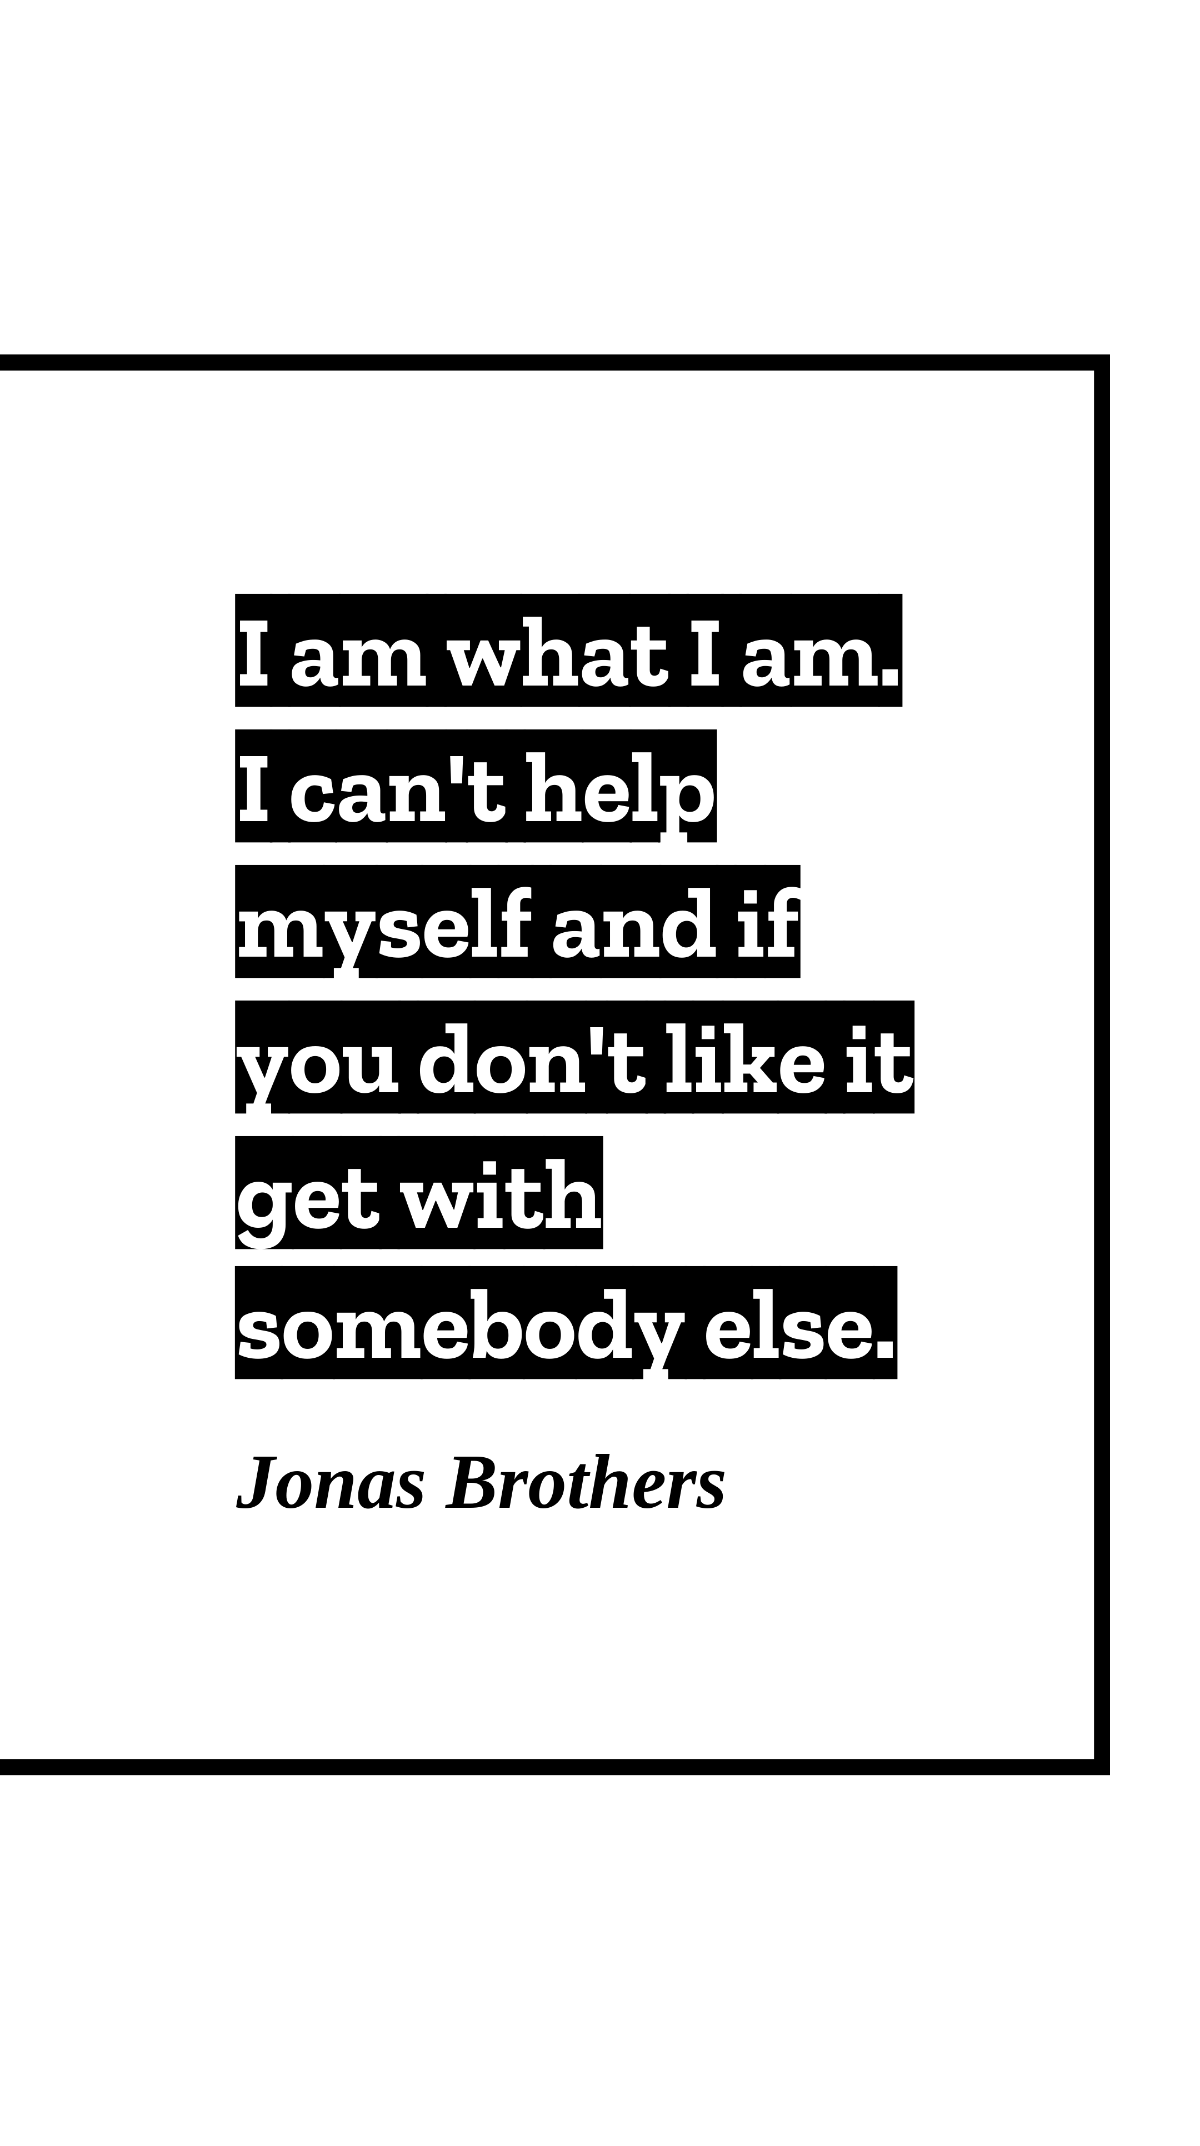 Free Jonas Brothers - I am what I am. I can't help myself and if you don't like it get with somebody else. Template